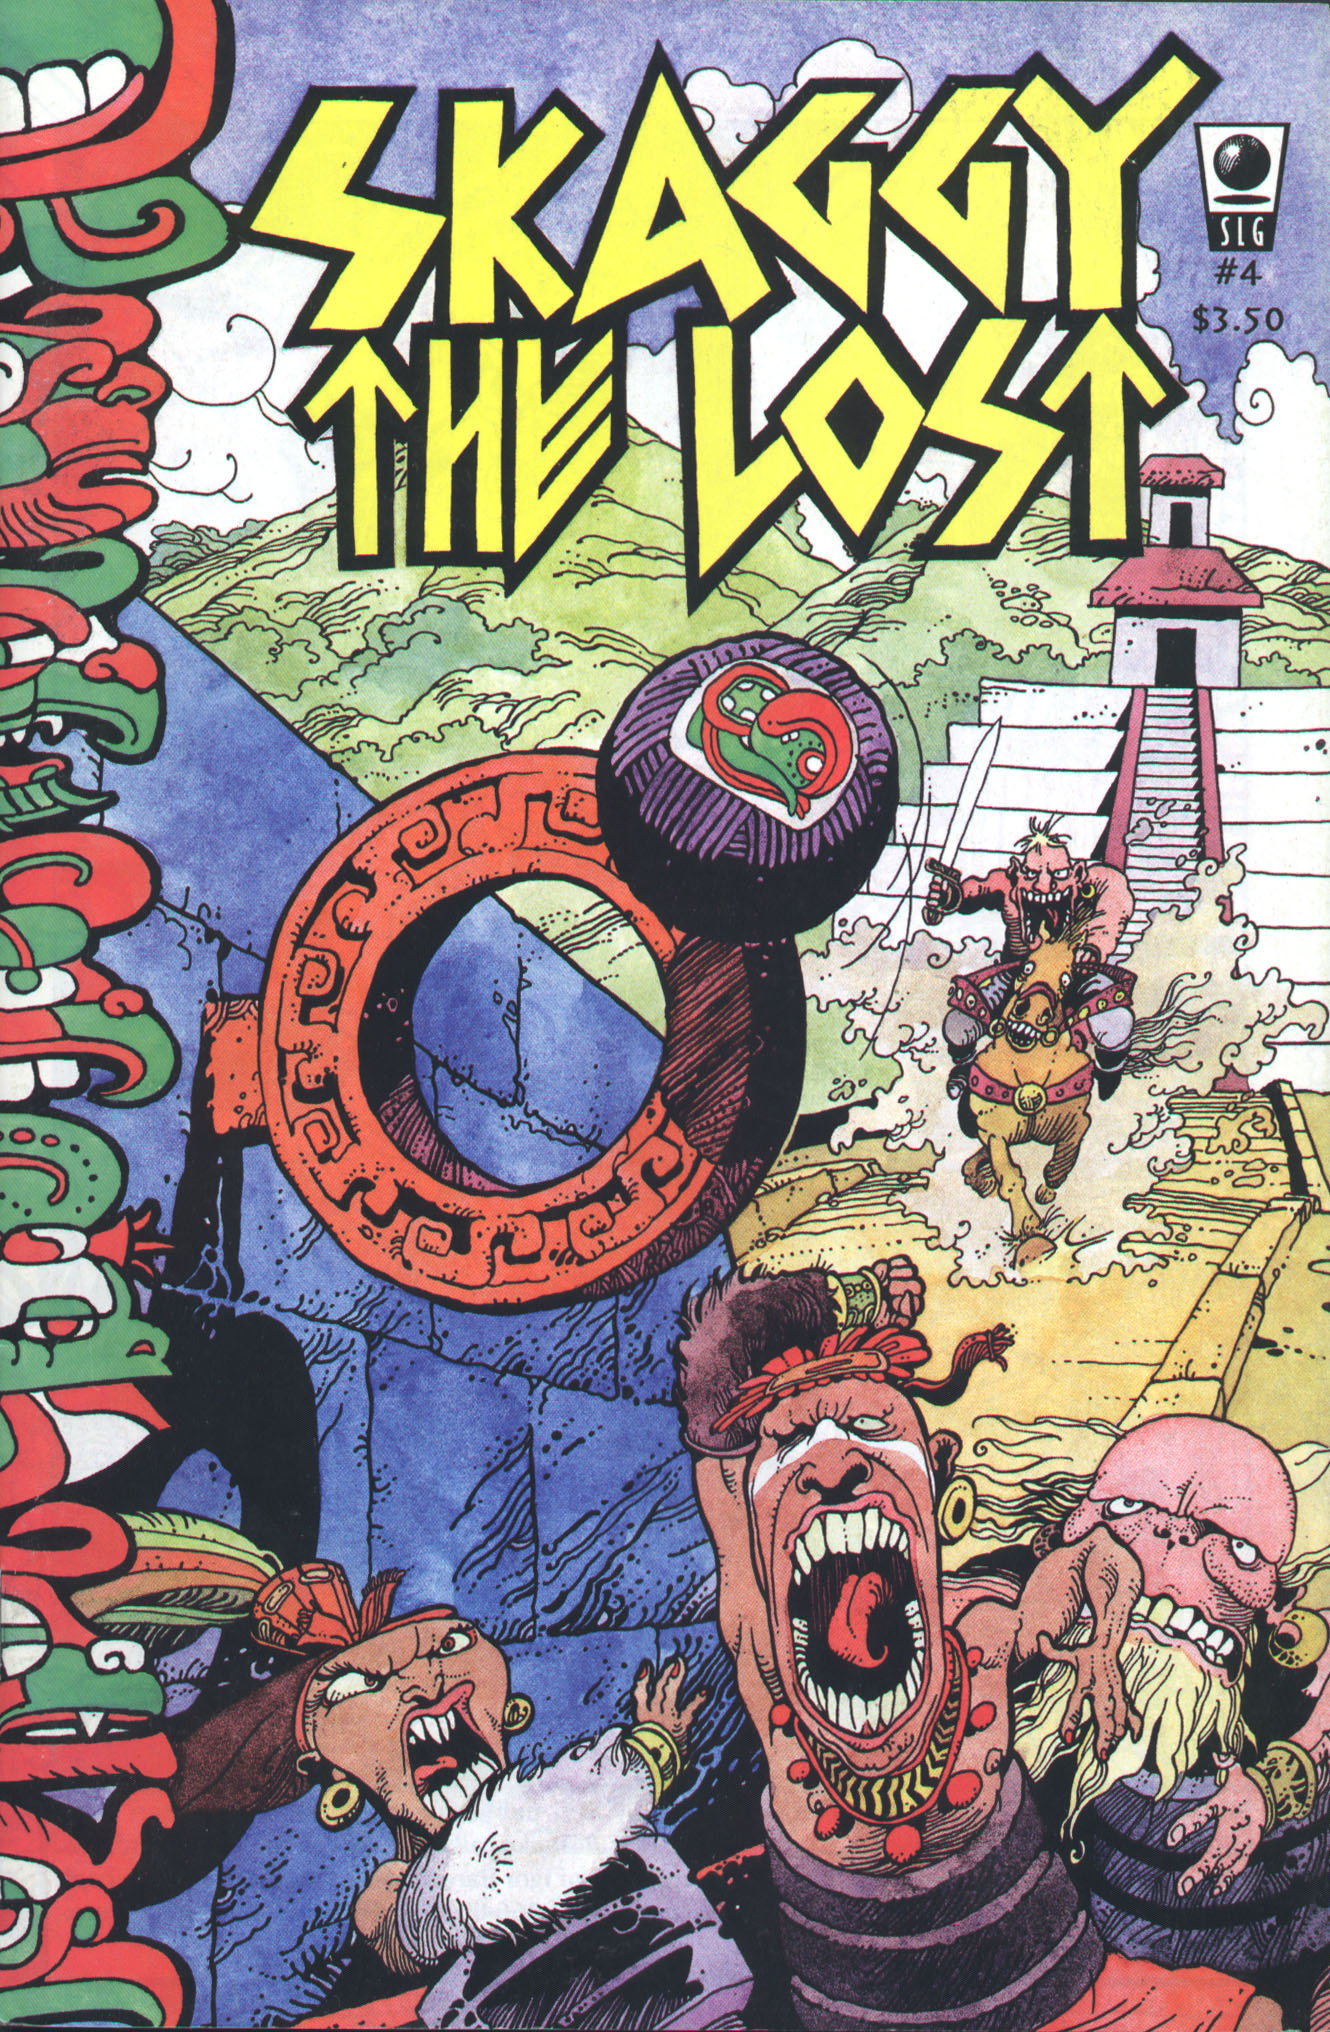 Read online Skaggy the Lost comic -  Issue #4 - 1